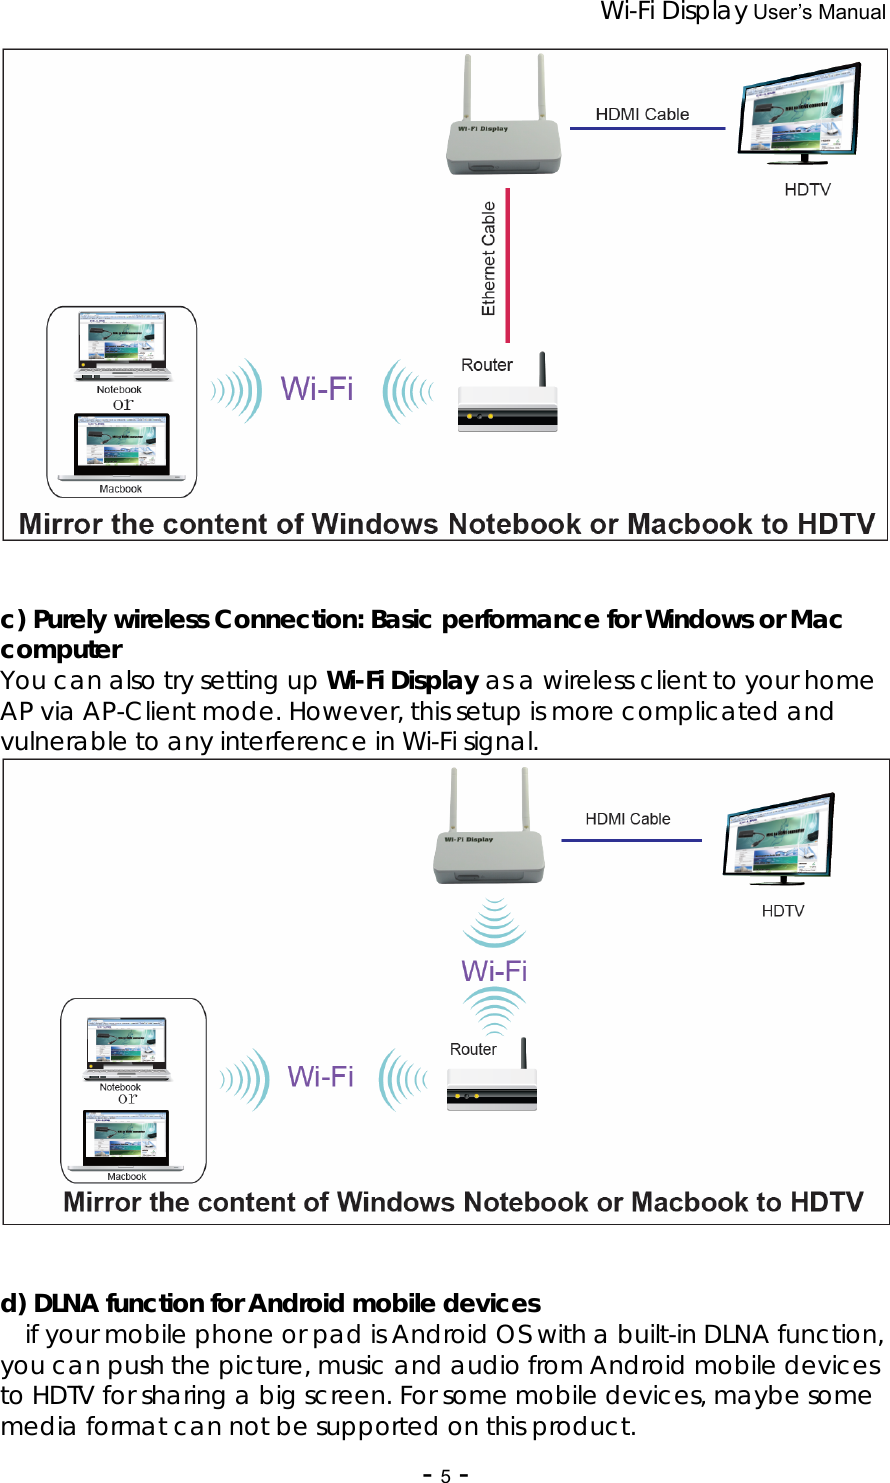 Wi-Fi Display User’s Manual - 5 -    c) Purely wireless Connection: Basic performance for Windows or Mac computer You can also try setting up Wi-Fi Display as a wireless client to your home AP via AP-Client mode. However, this setup is more complicated and vulnerable to any interference in Wi-Fi signal.    d) DLNA function for Android mobile devices    if your mobile phone or pad is Android OS with a built-in DLNA function, you can push the picture, music and audio from Android mobile devices to HDTV for sharing a big screen. For some mobile devices, maybe some media format can not be supported on this product.   